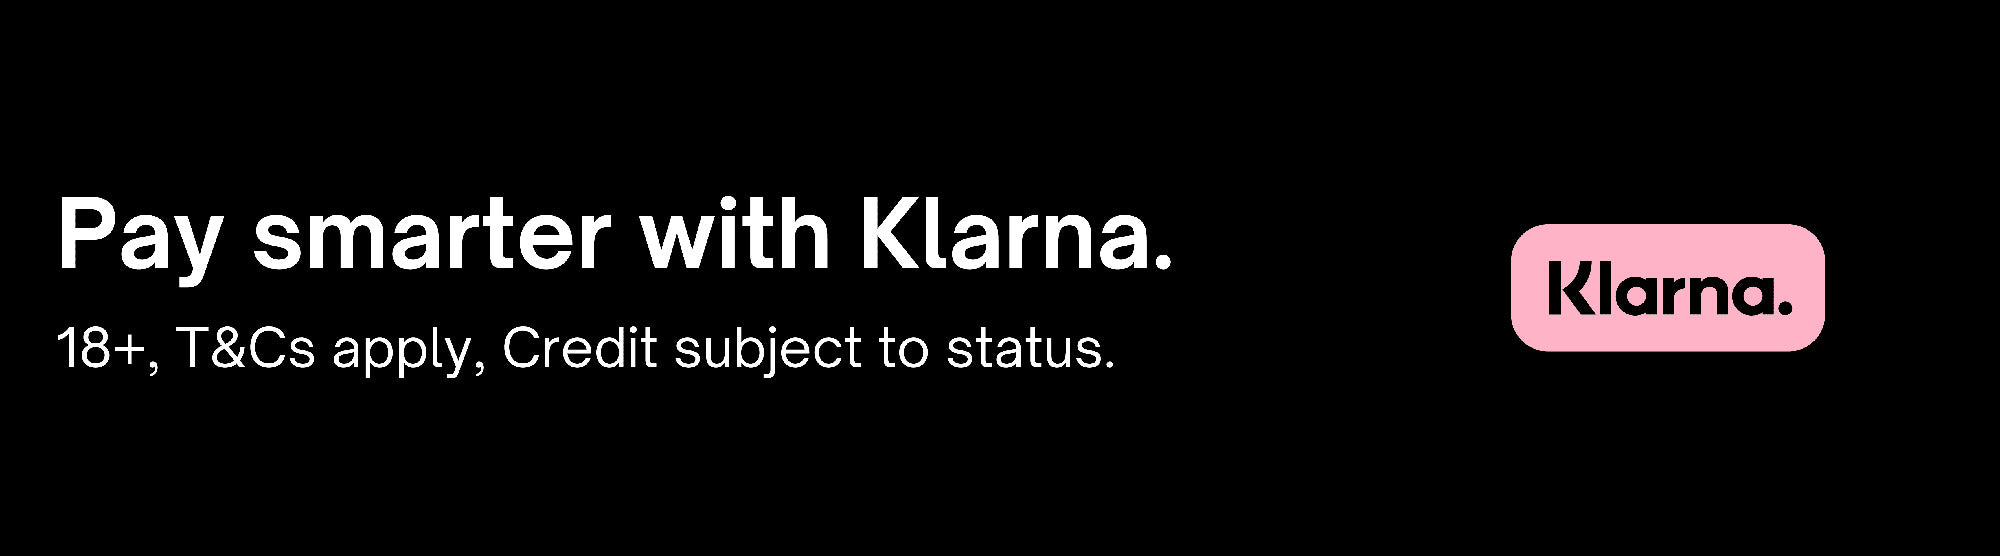 From the top of the Klarna Page, a simple banner of black background and White headlines features the smarter payment plans with Klarna slogan